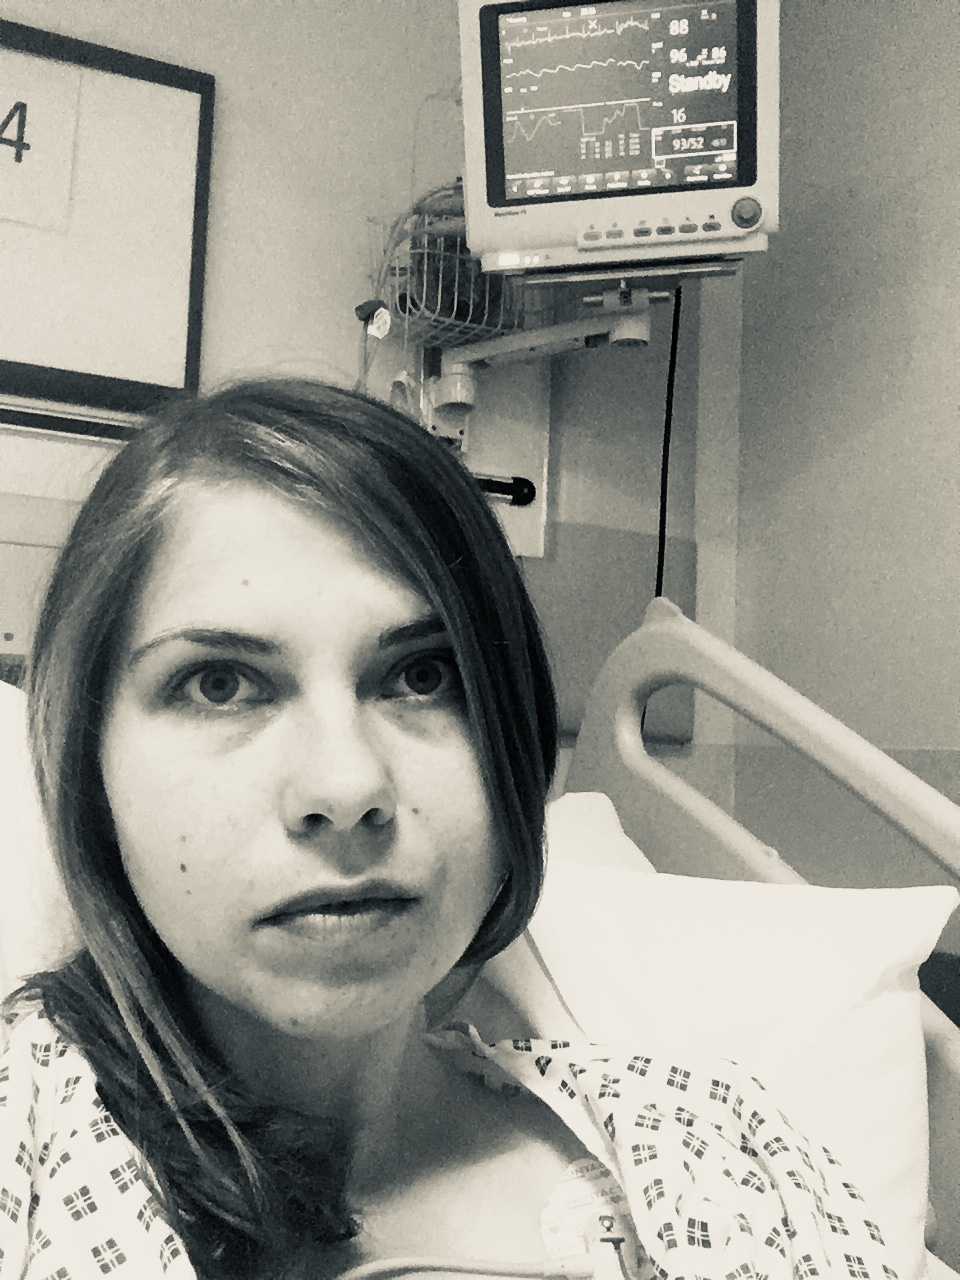 A black and white photo of me with the screen above me again in the hospital bed with the gown on. 